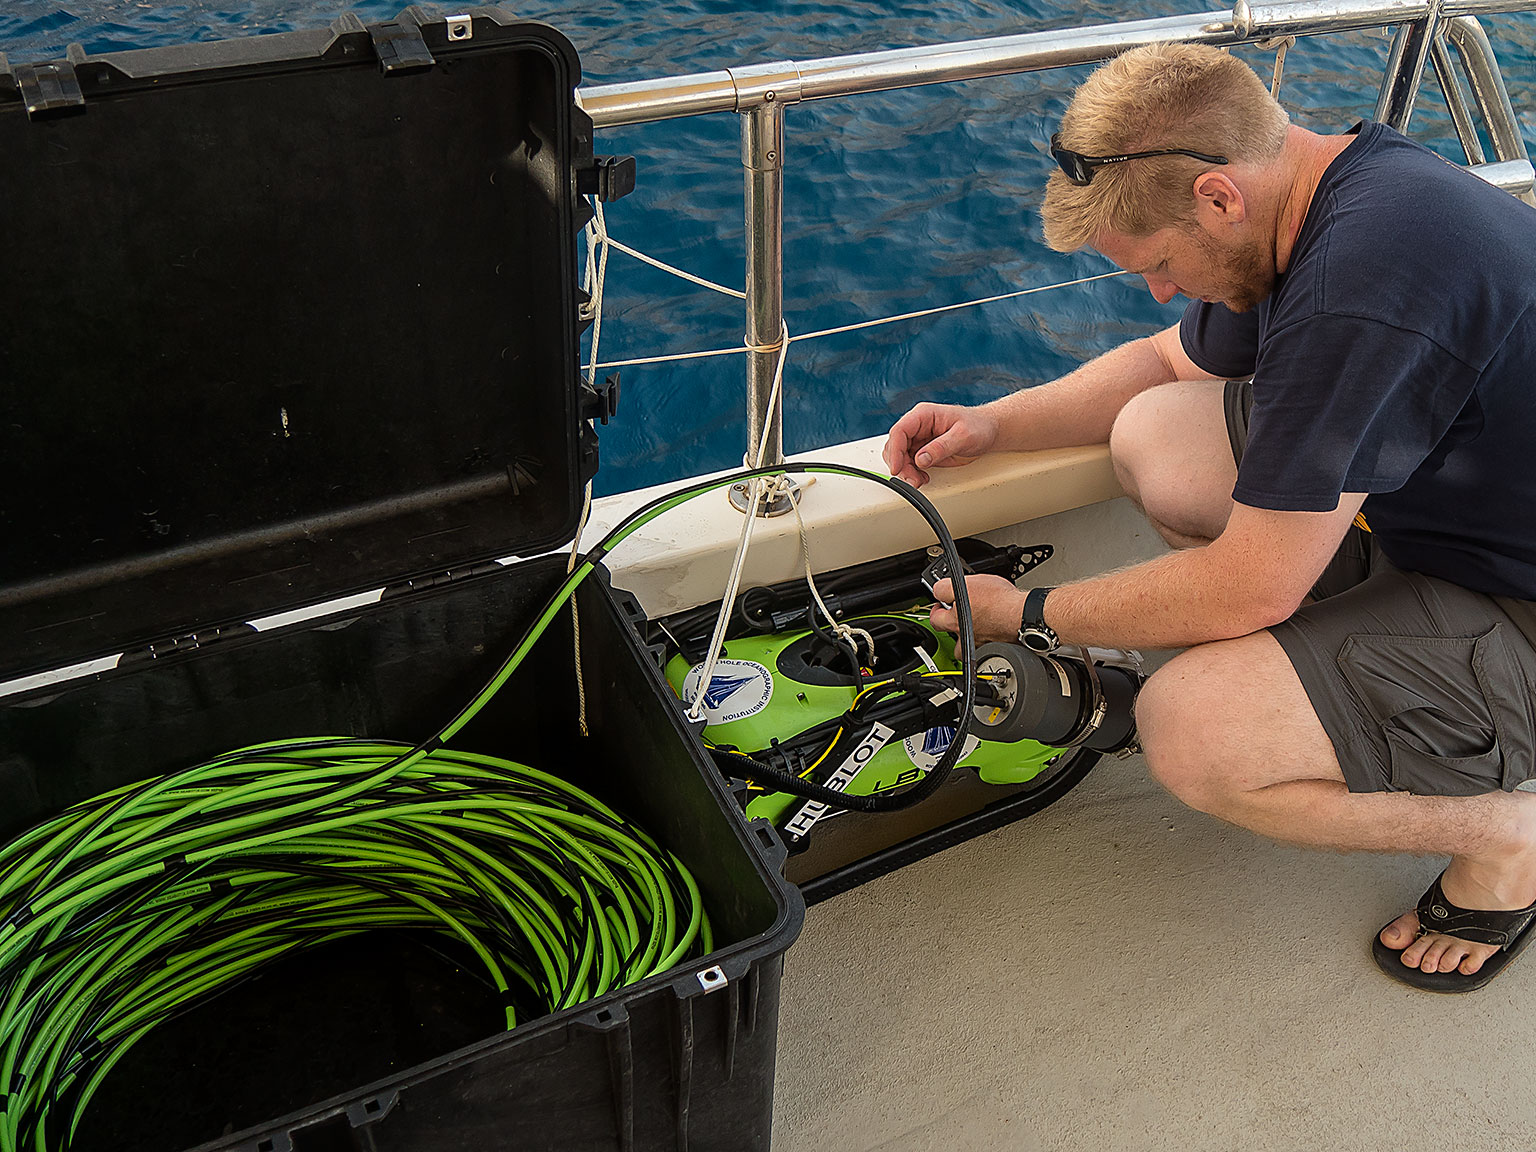 Dr. Carl Kaiser preparing the ROV, which provides a live video feed to the surface.